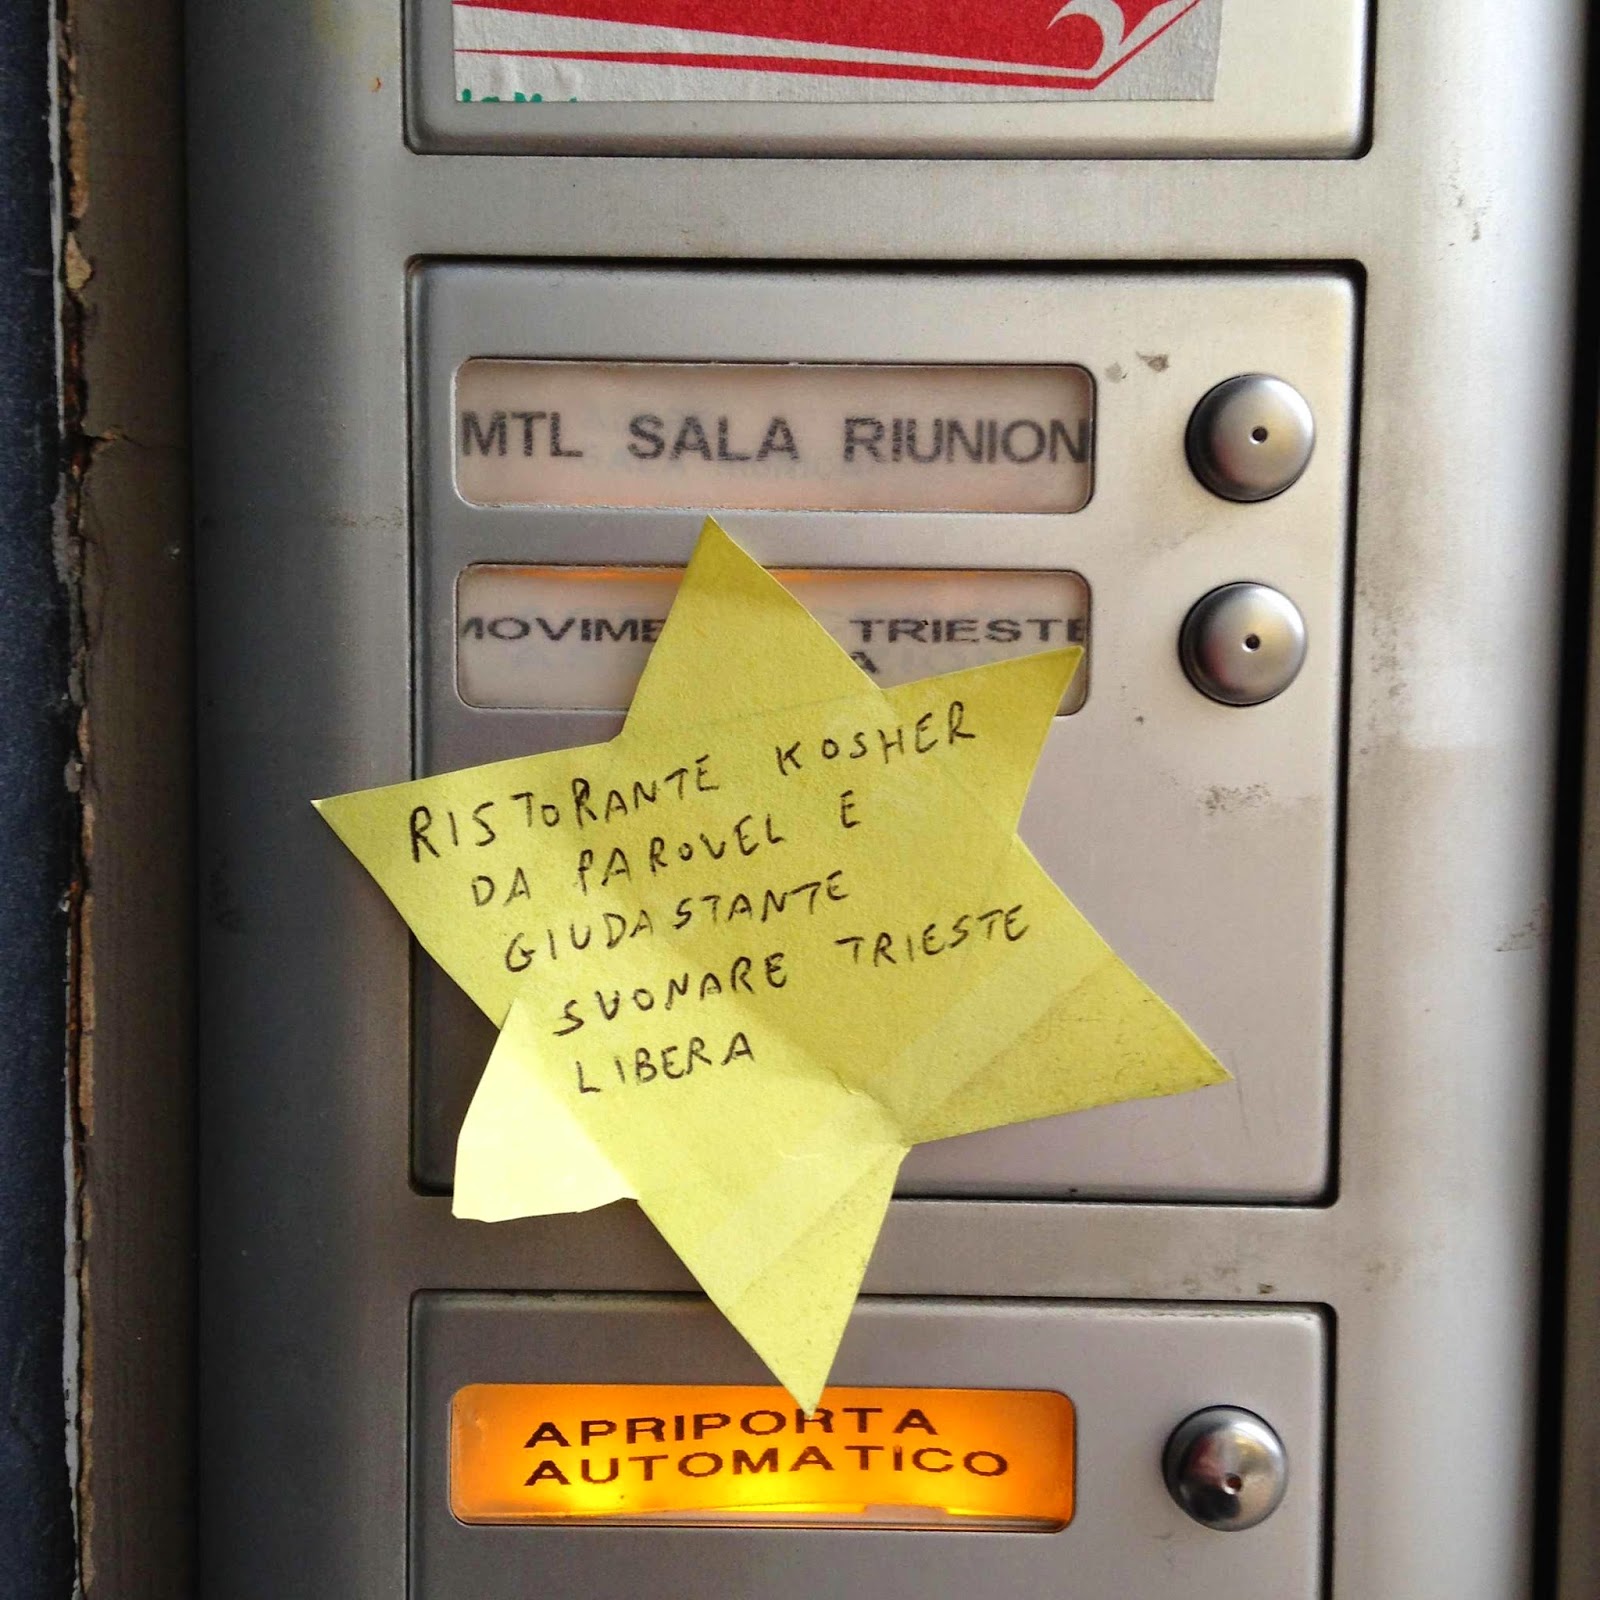 Someone glued on Free Trieste's doorbell a yellow star with the derogatory writing «KOSHER RESTAURANT AT PAROVEL AND GIUDASTANTE RING TO TRIESTE LIBERA».